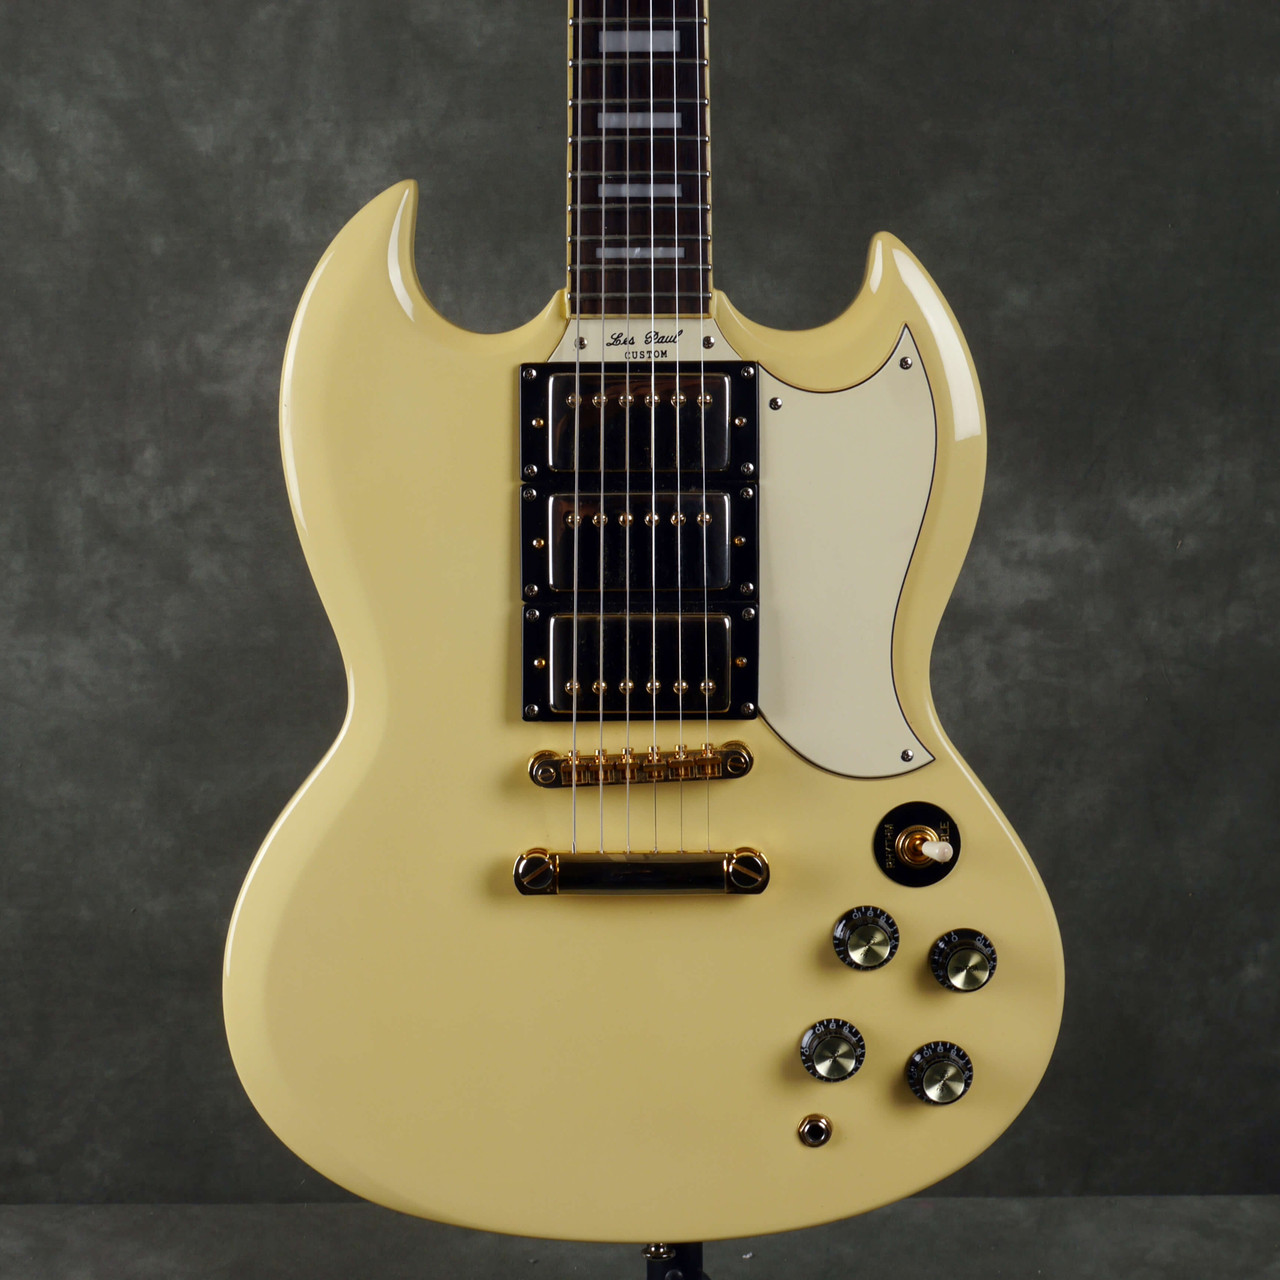 Epiphone G-400 Custom 3-Pickup Electric Guitar - Antique Ivory - 2nd Hand